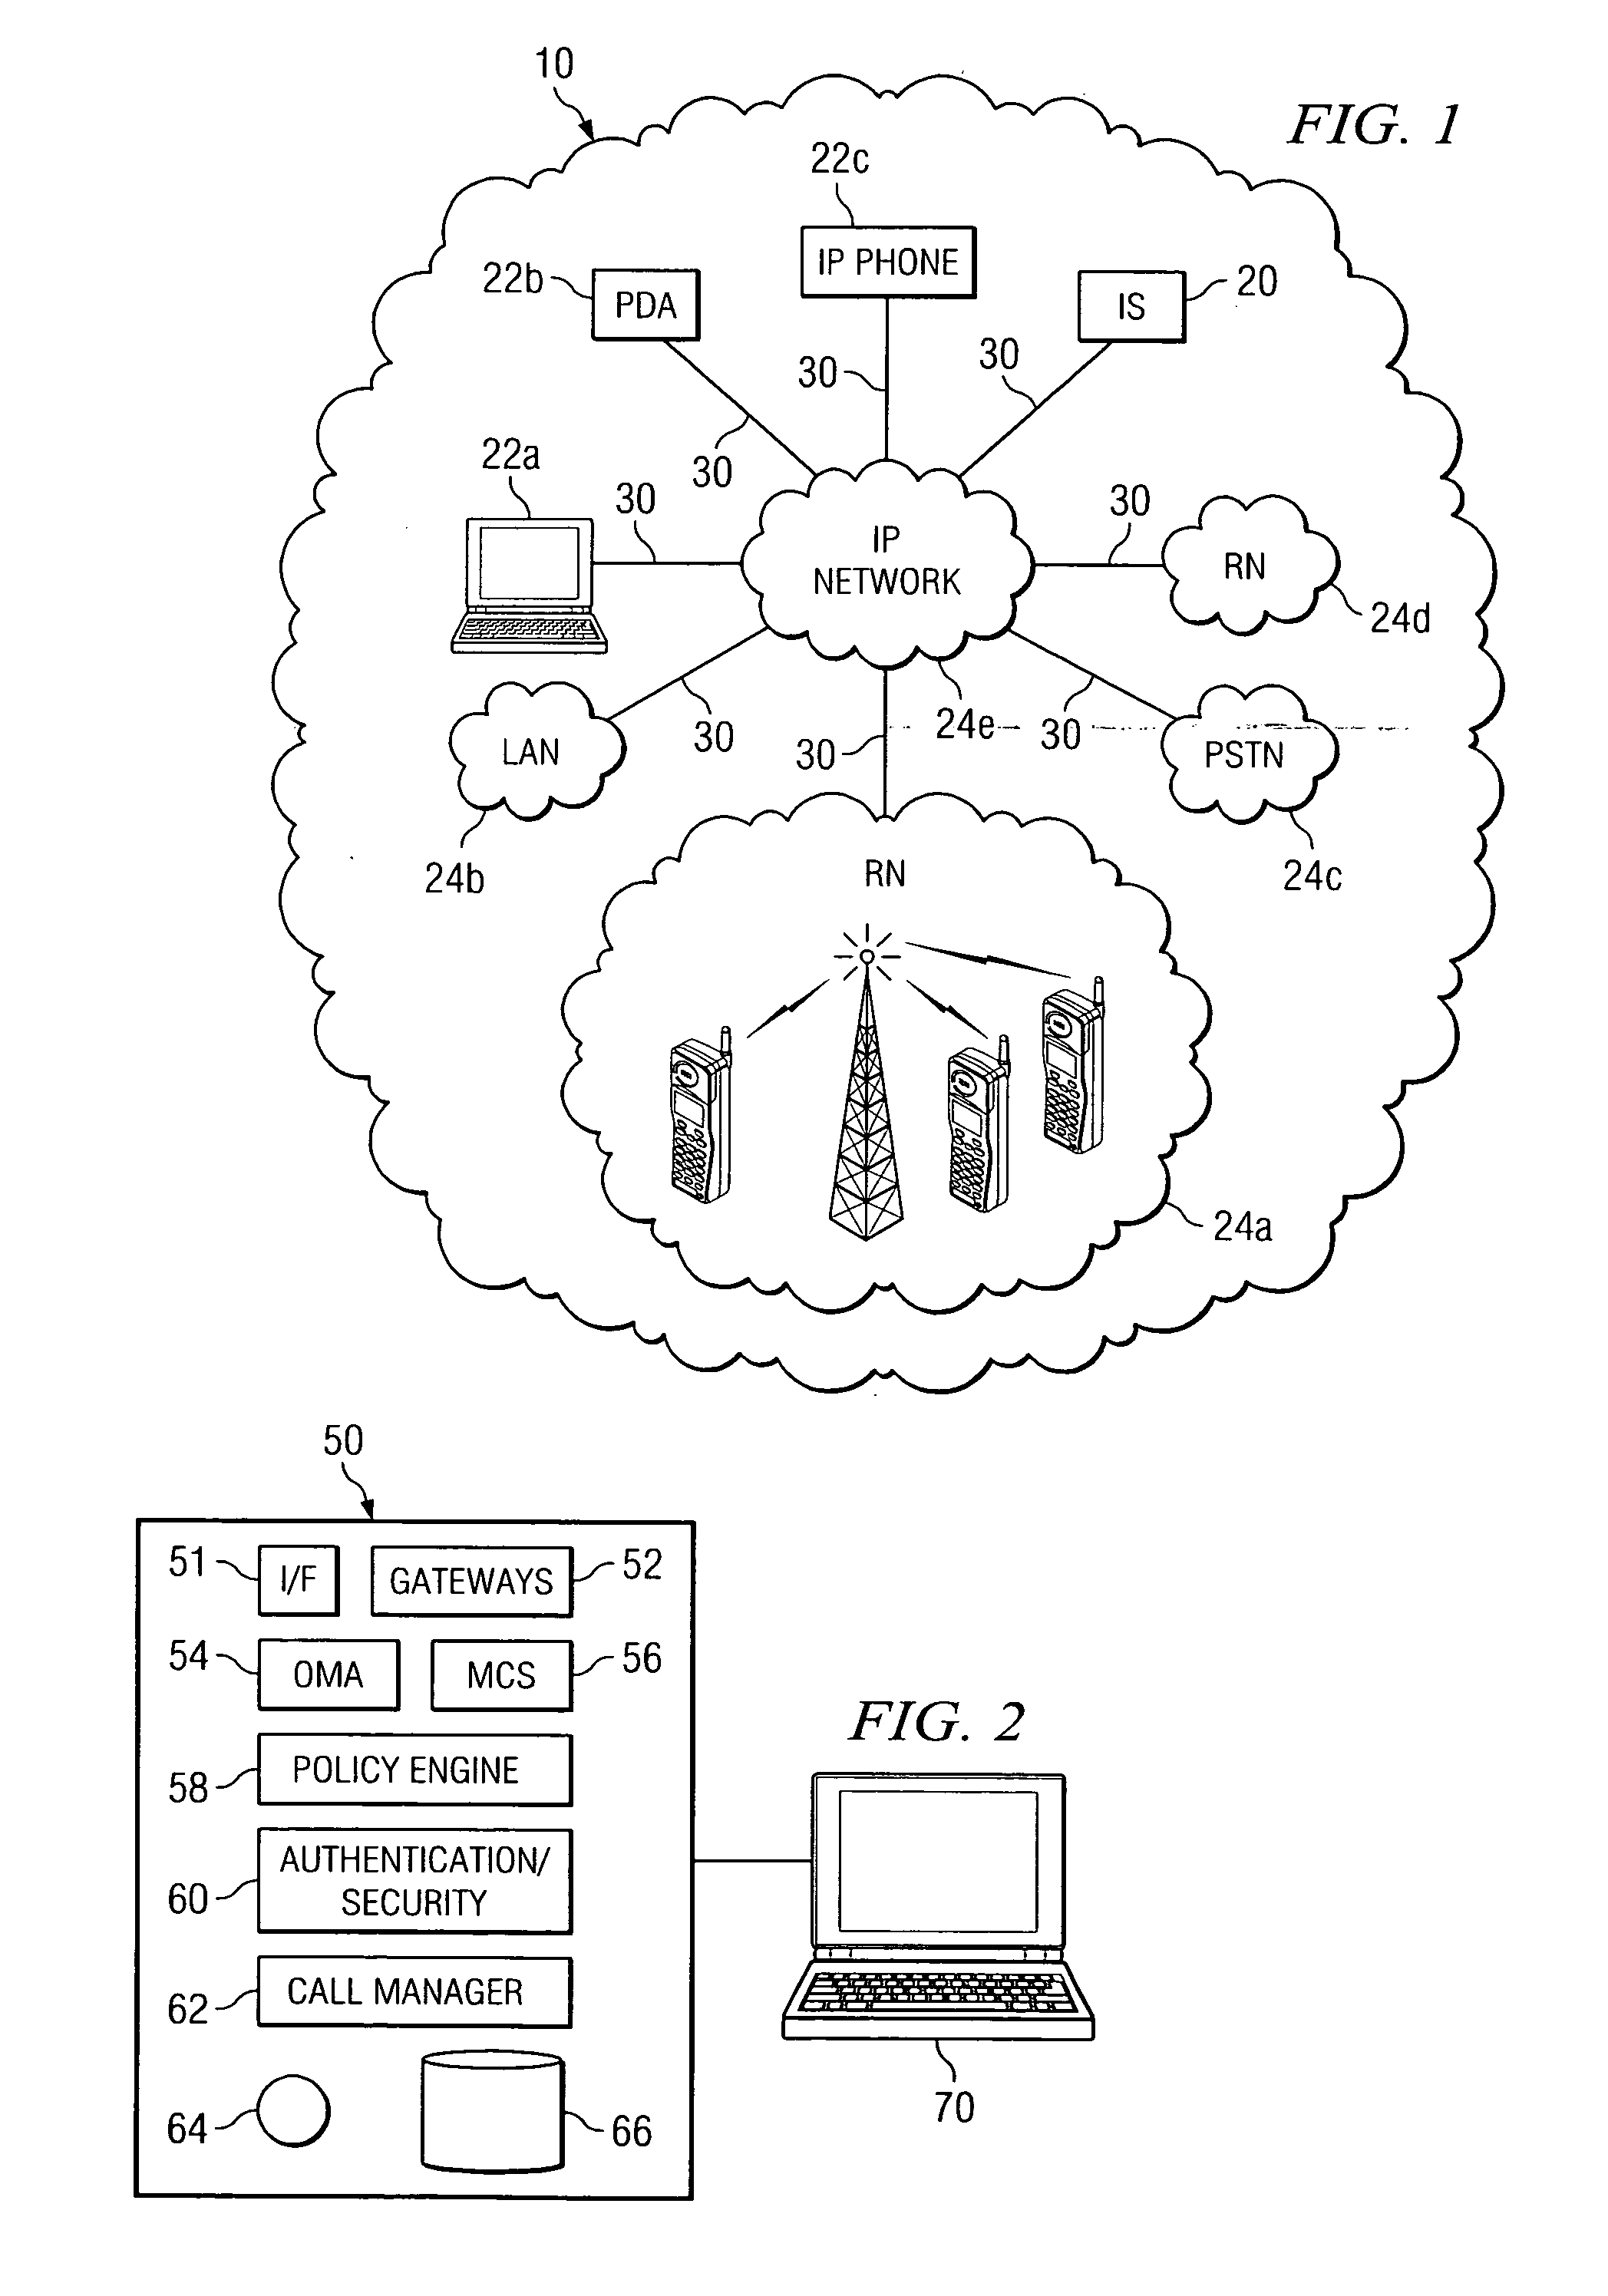 Method and system for automatic configuration of virtual talk groups based on location of media sources